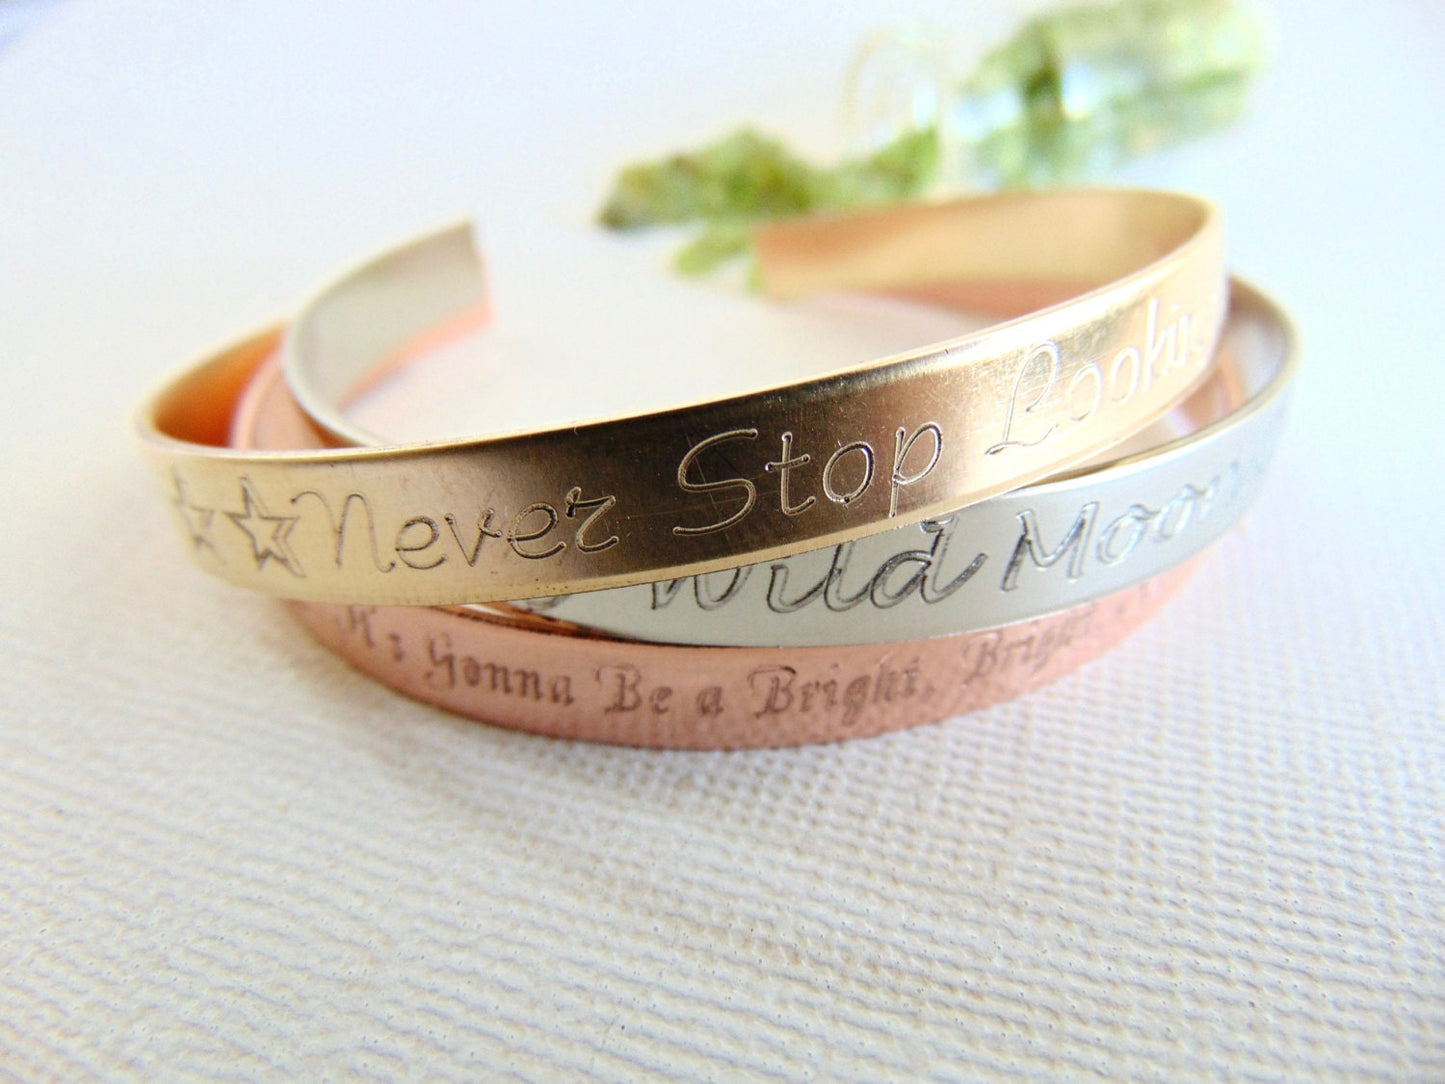 Stackable bracelet, Engraved cuff, quote Bracelet, layered cuff, personalized cuff bracelet, inspirational jewelry, mantra bangle, yoga Gift